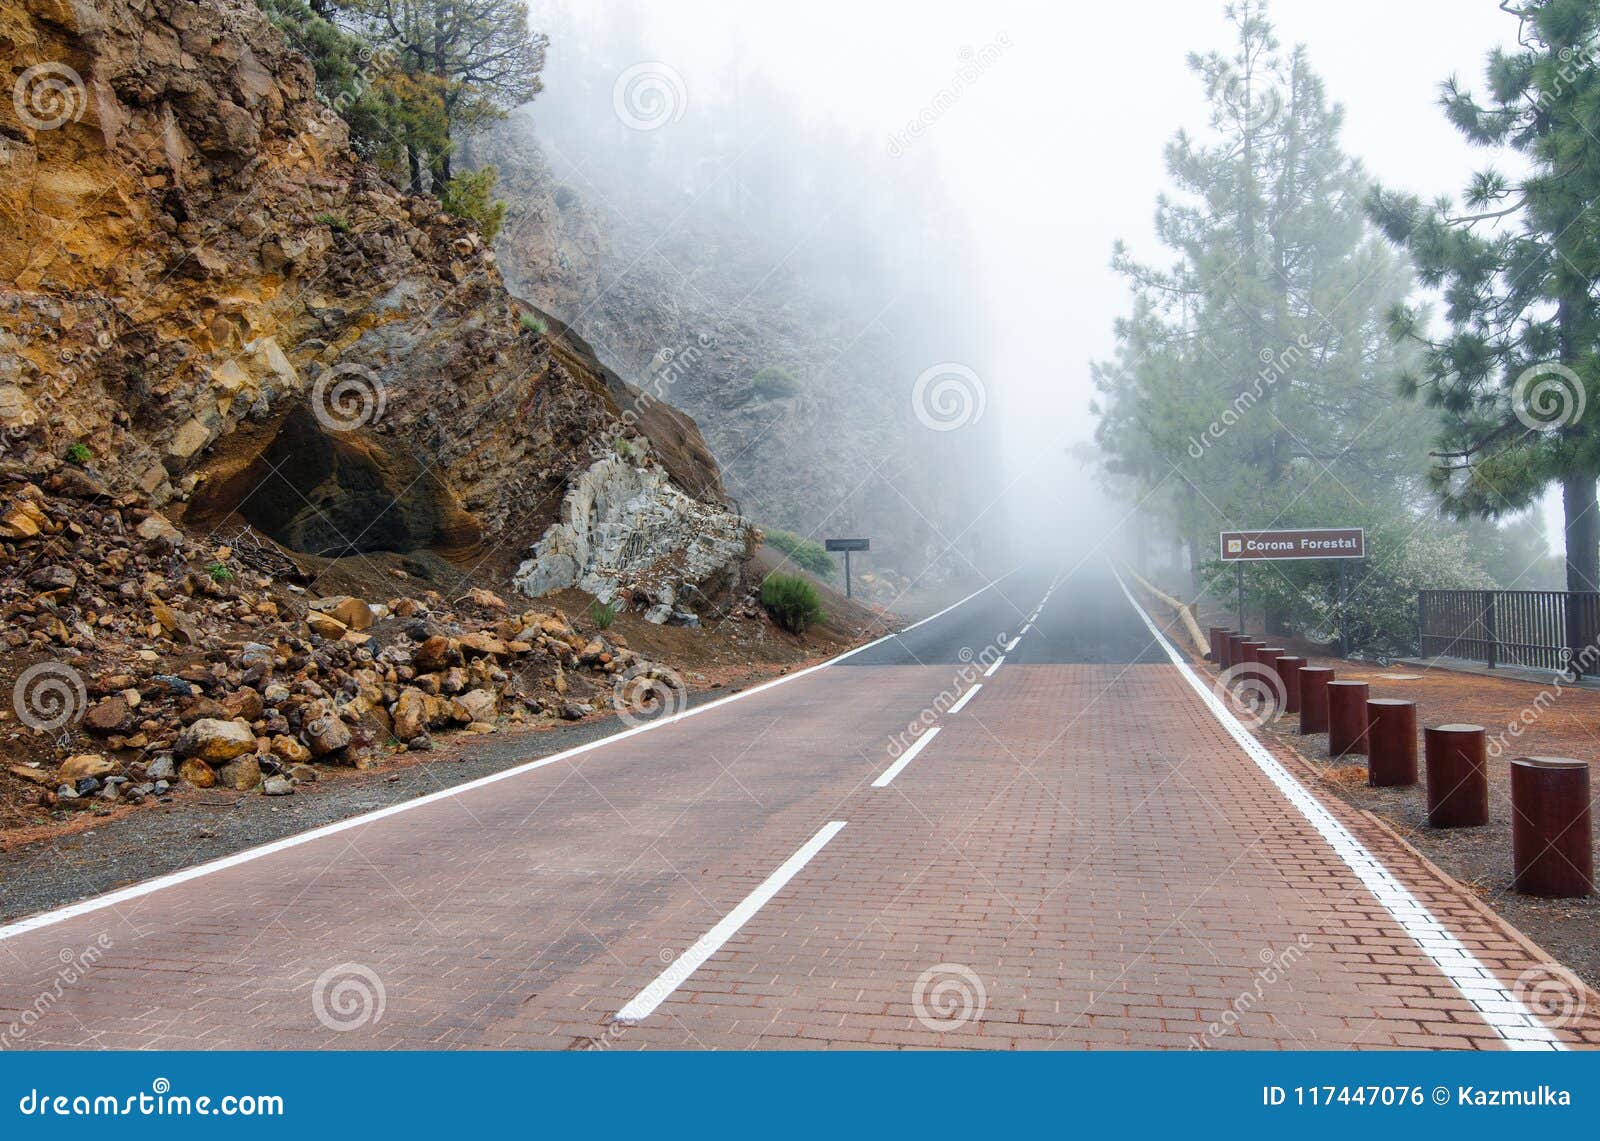 foggy mountain road in the natural park of the corona forestal. tenerife, canary islands, spain.